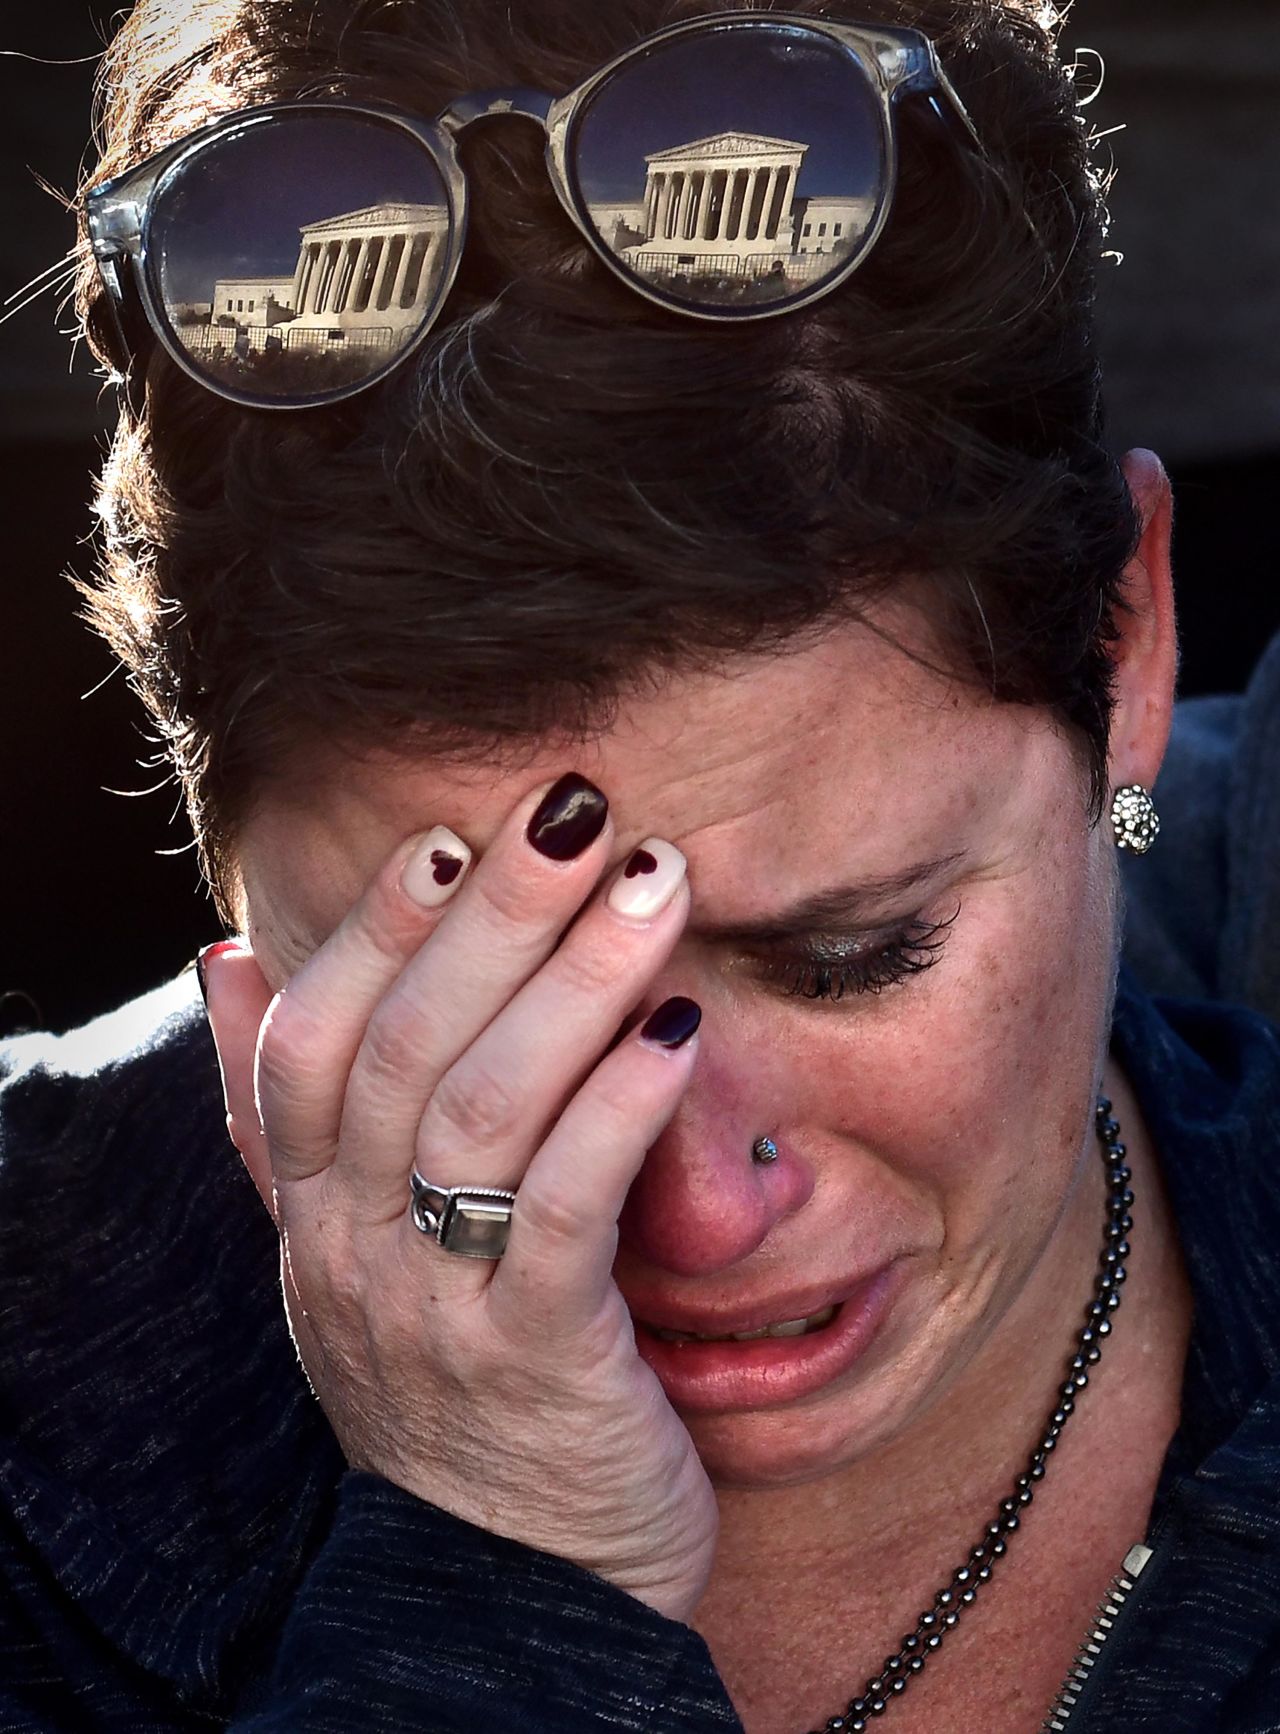 Michele Driesenga weeps during a vigil at the Supreme Court.